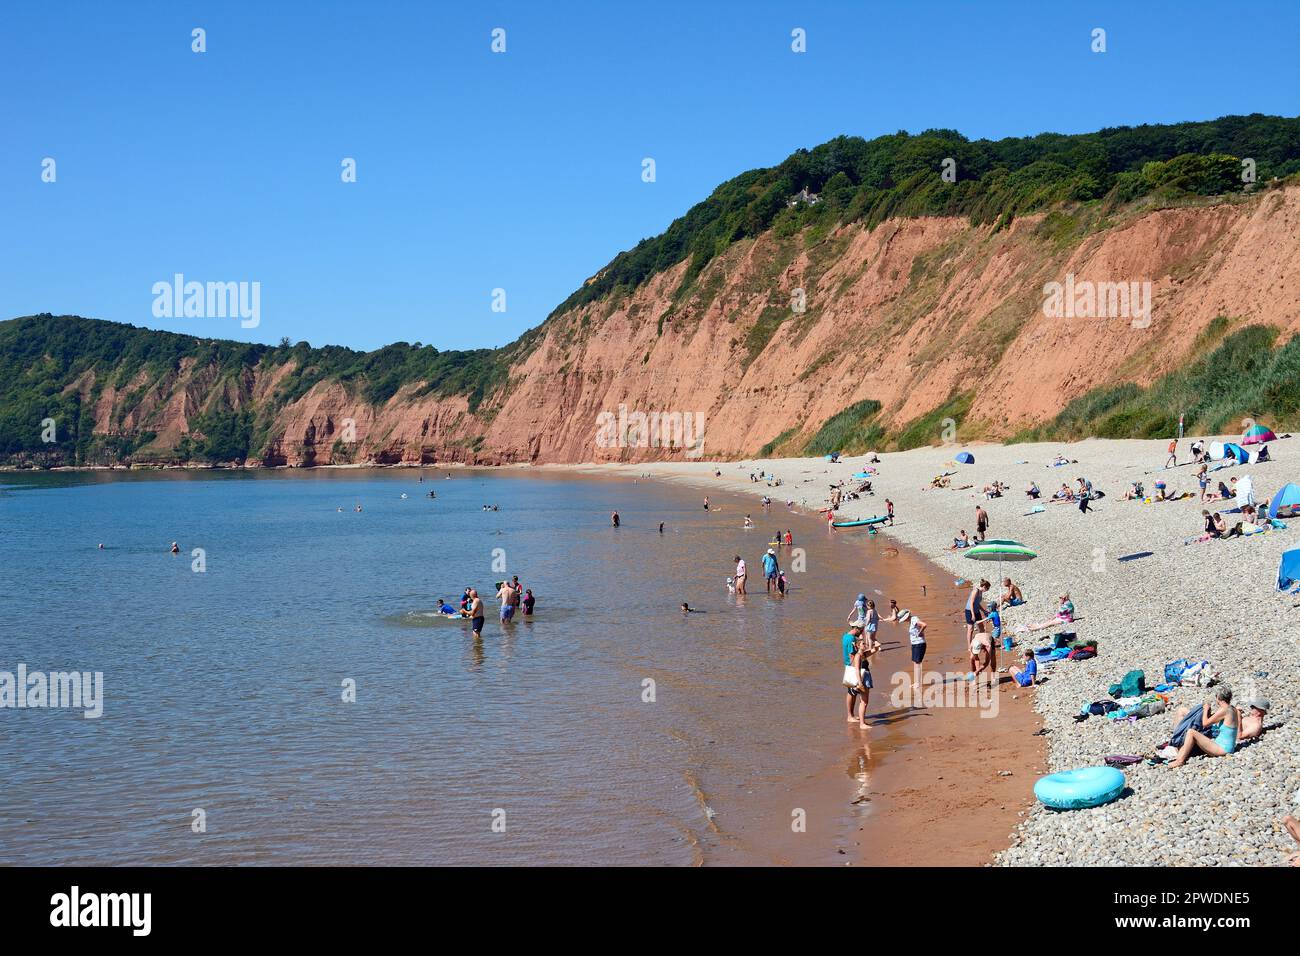 Tourists relaxing on Jacobs Ladder beach with views towards the cliffs, Sidmouth, Devon, UK, Europe. Stock Photo